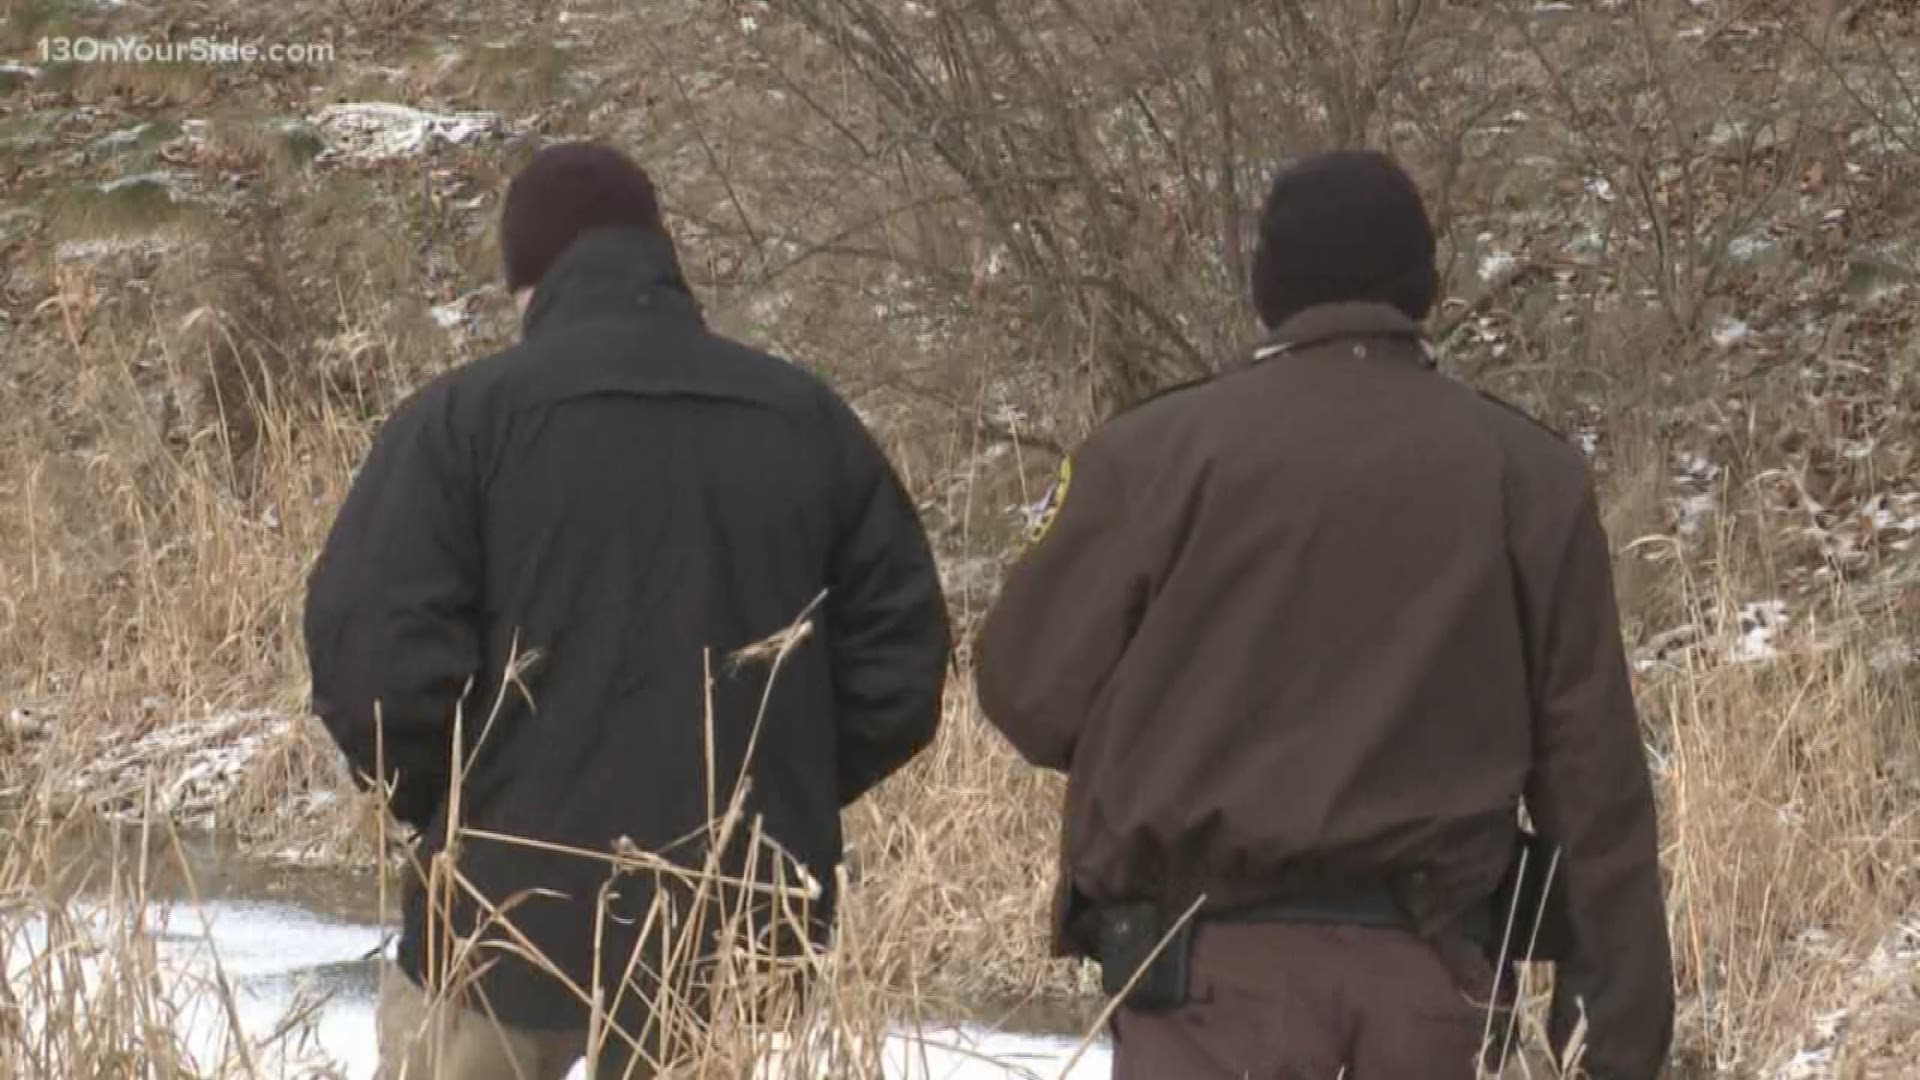 Police said a homeless man from Grand Rapids drowned in a retention pond.